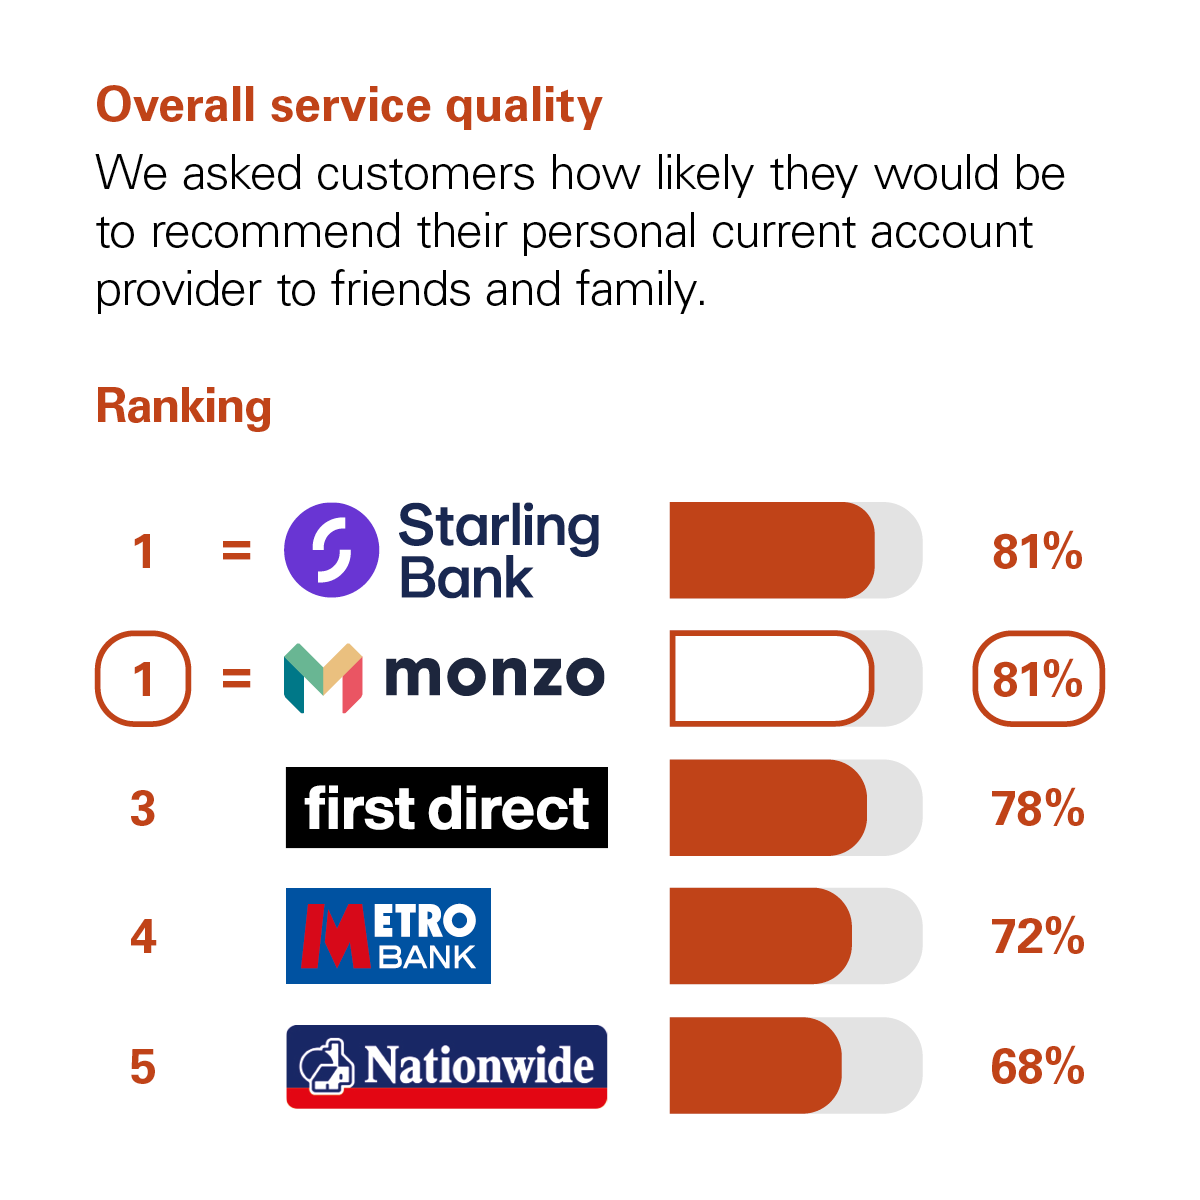 Graph showing the results of the CMA scoring of UK banks in the Overall Service Quality category. The CMA asked customers how likely they would be to recommend their personal current account provider to friends and family. The rankings with percentage scores are: Joint 1st are Monzo and Starling Bank with 81%. 3rd First Direct with 78%. 4th Metro Bank with 72%. 5th Nationwide with 68%.